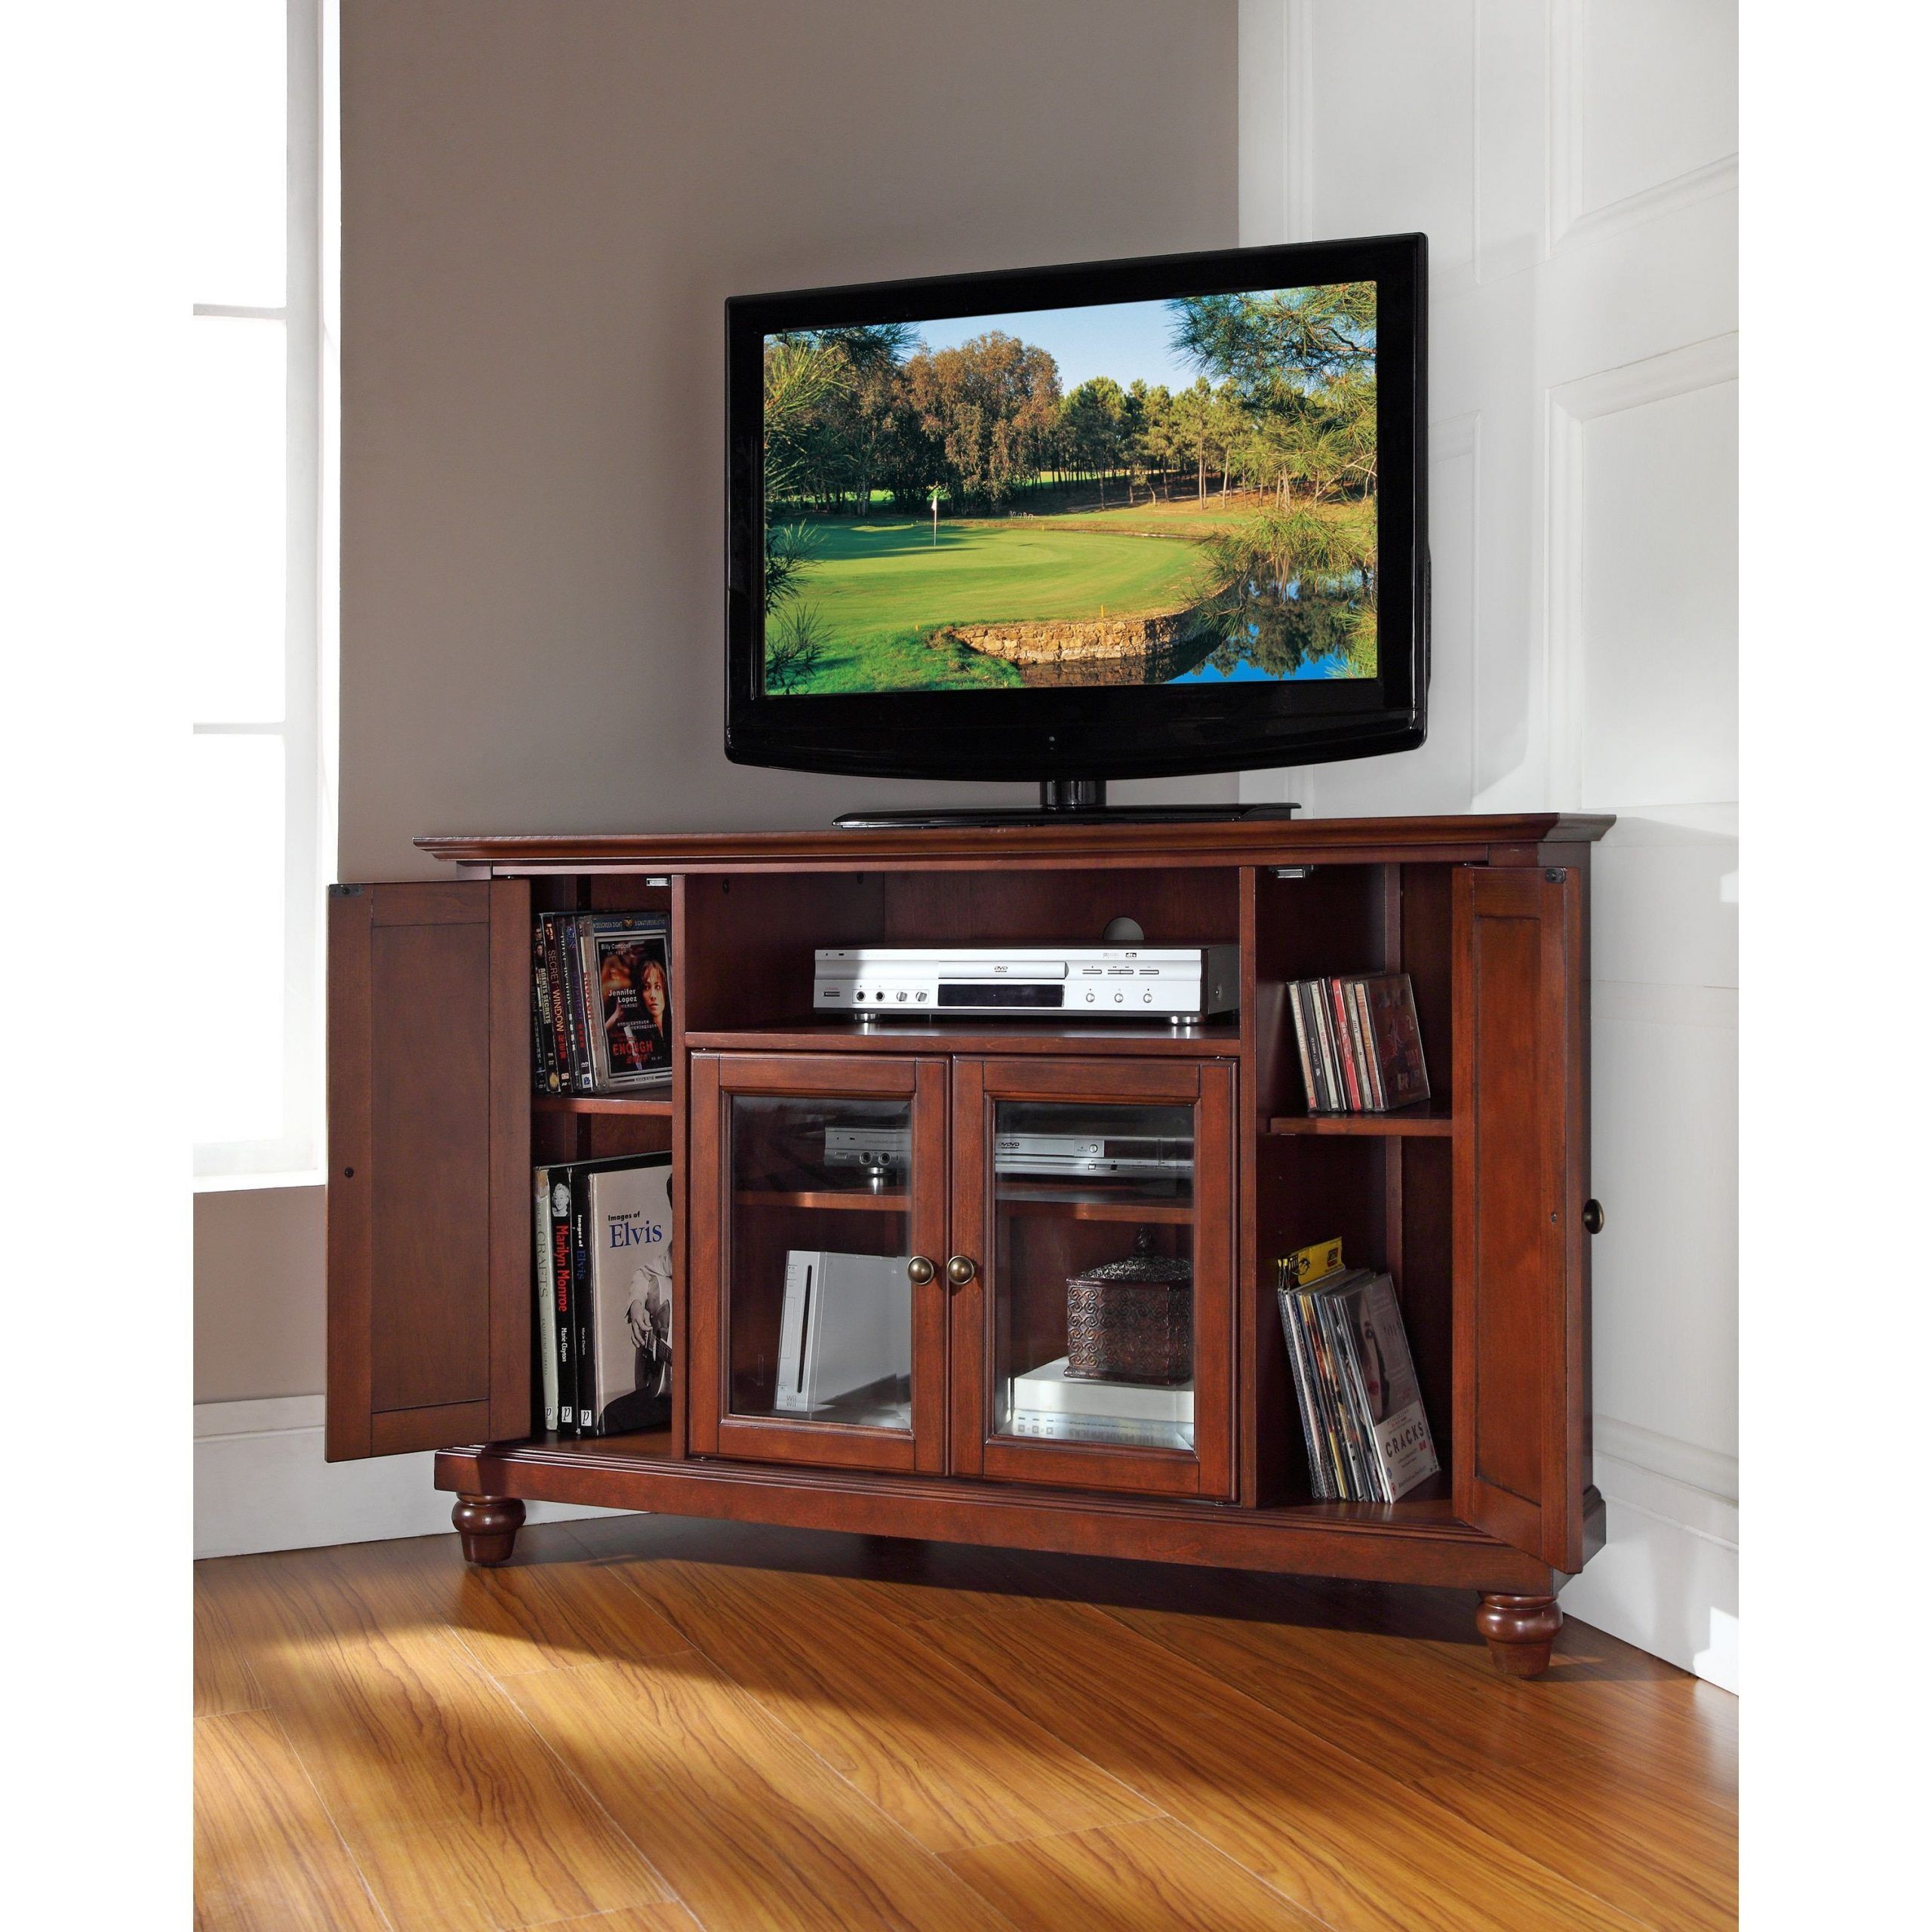 Our Best Living Room Furniture Deals | Wood Corner Tv Throughout Mahogany Corner Tv Stands (View 2 of 15)